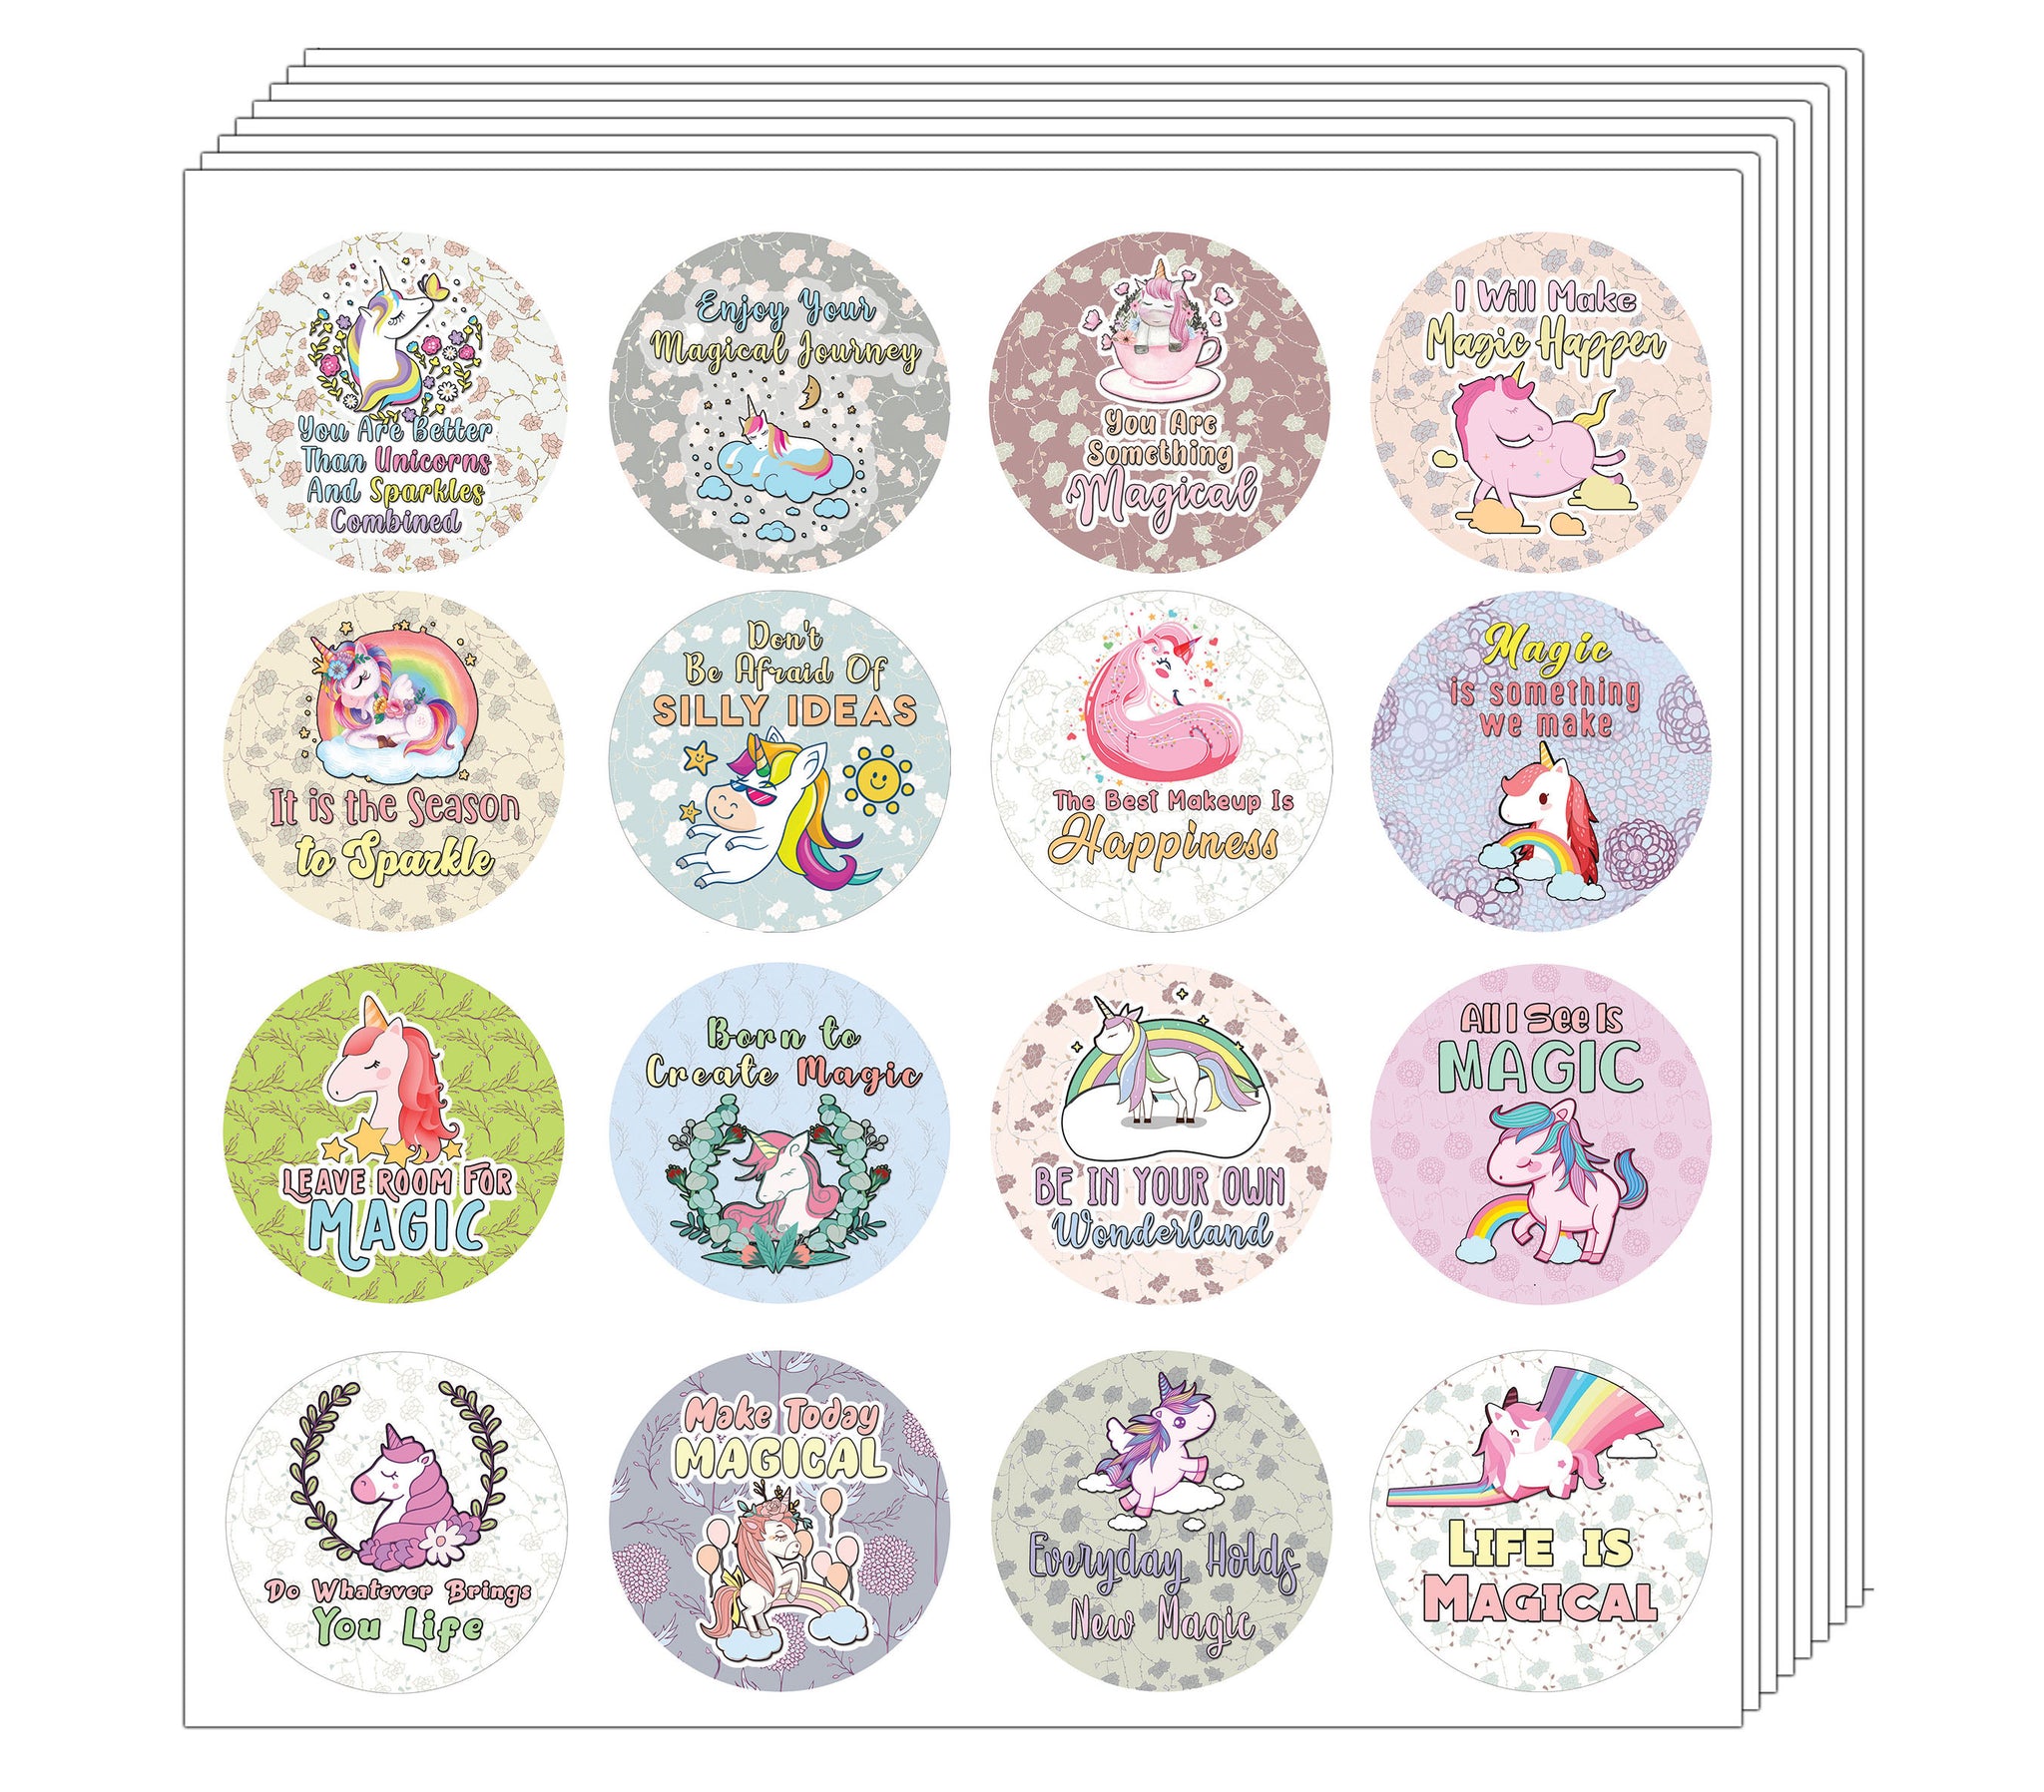 Creanoso Unicorn Stickers Series 3 - Magical (20-Sheet) - Premium Quality Gift Ideas for Children, Teens, & Adults for All Occasions - Stocking Stuffers Party Favor & Giveaways